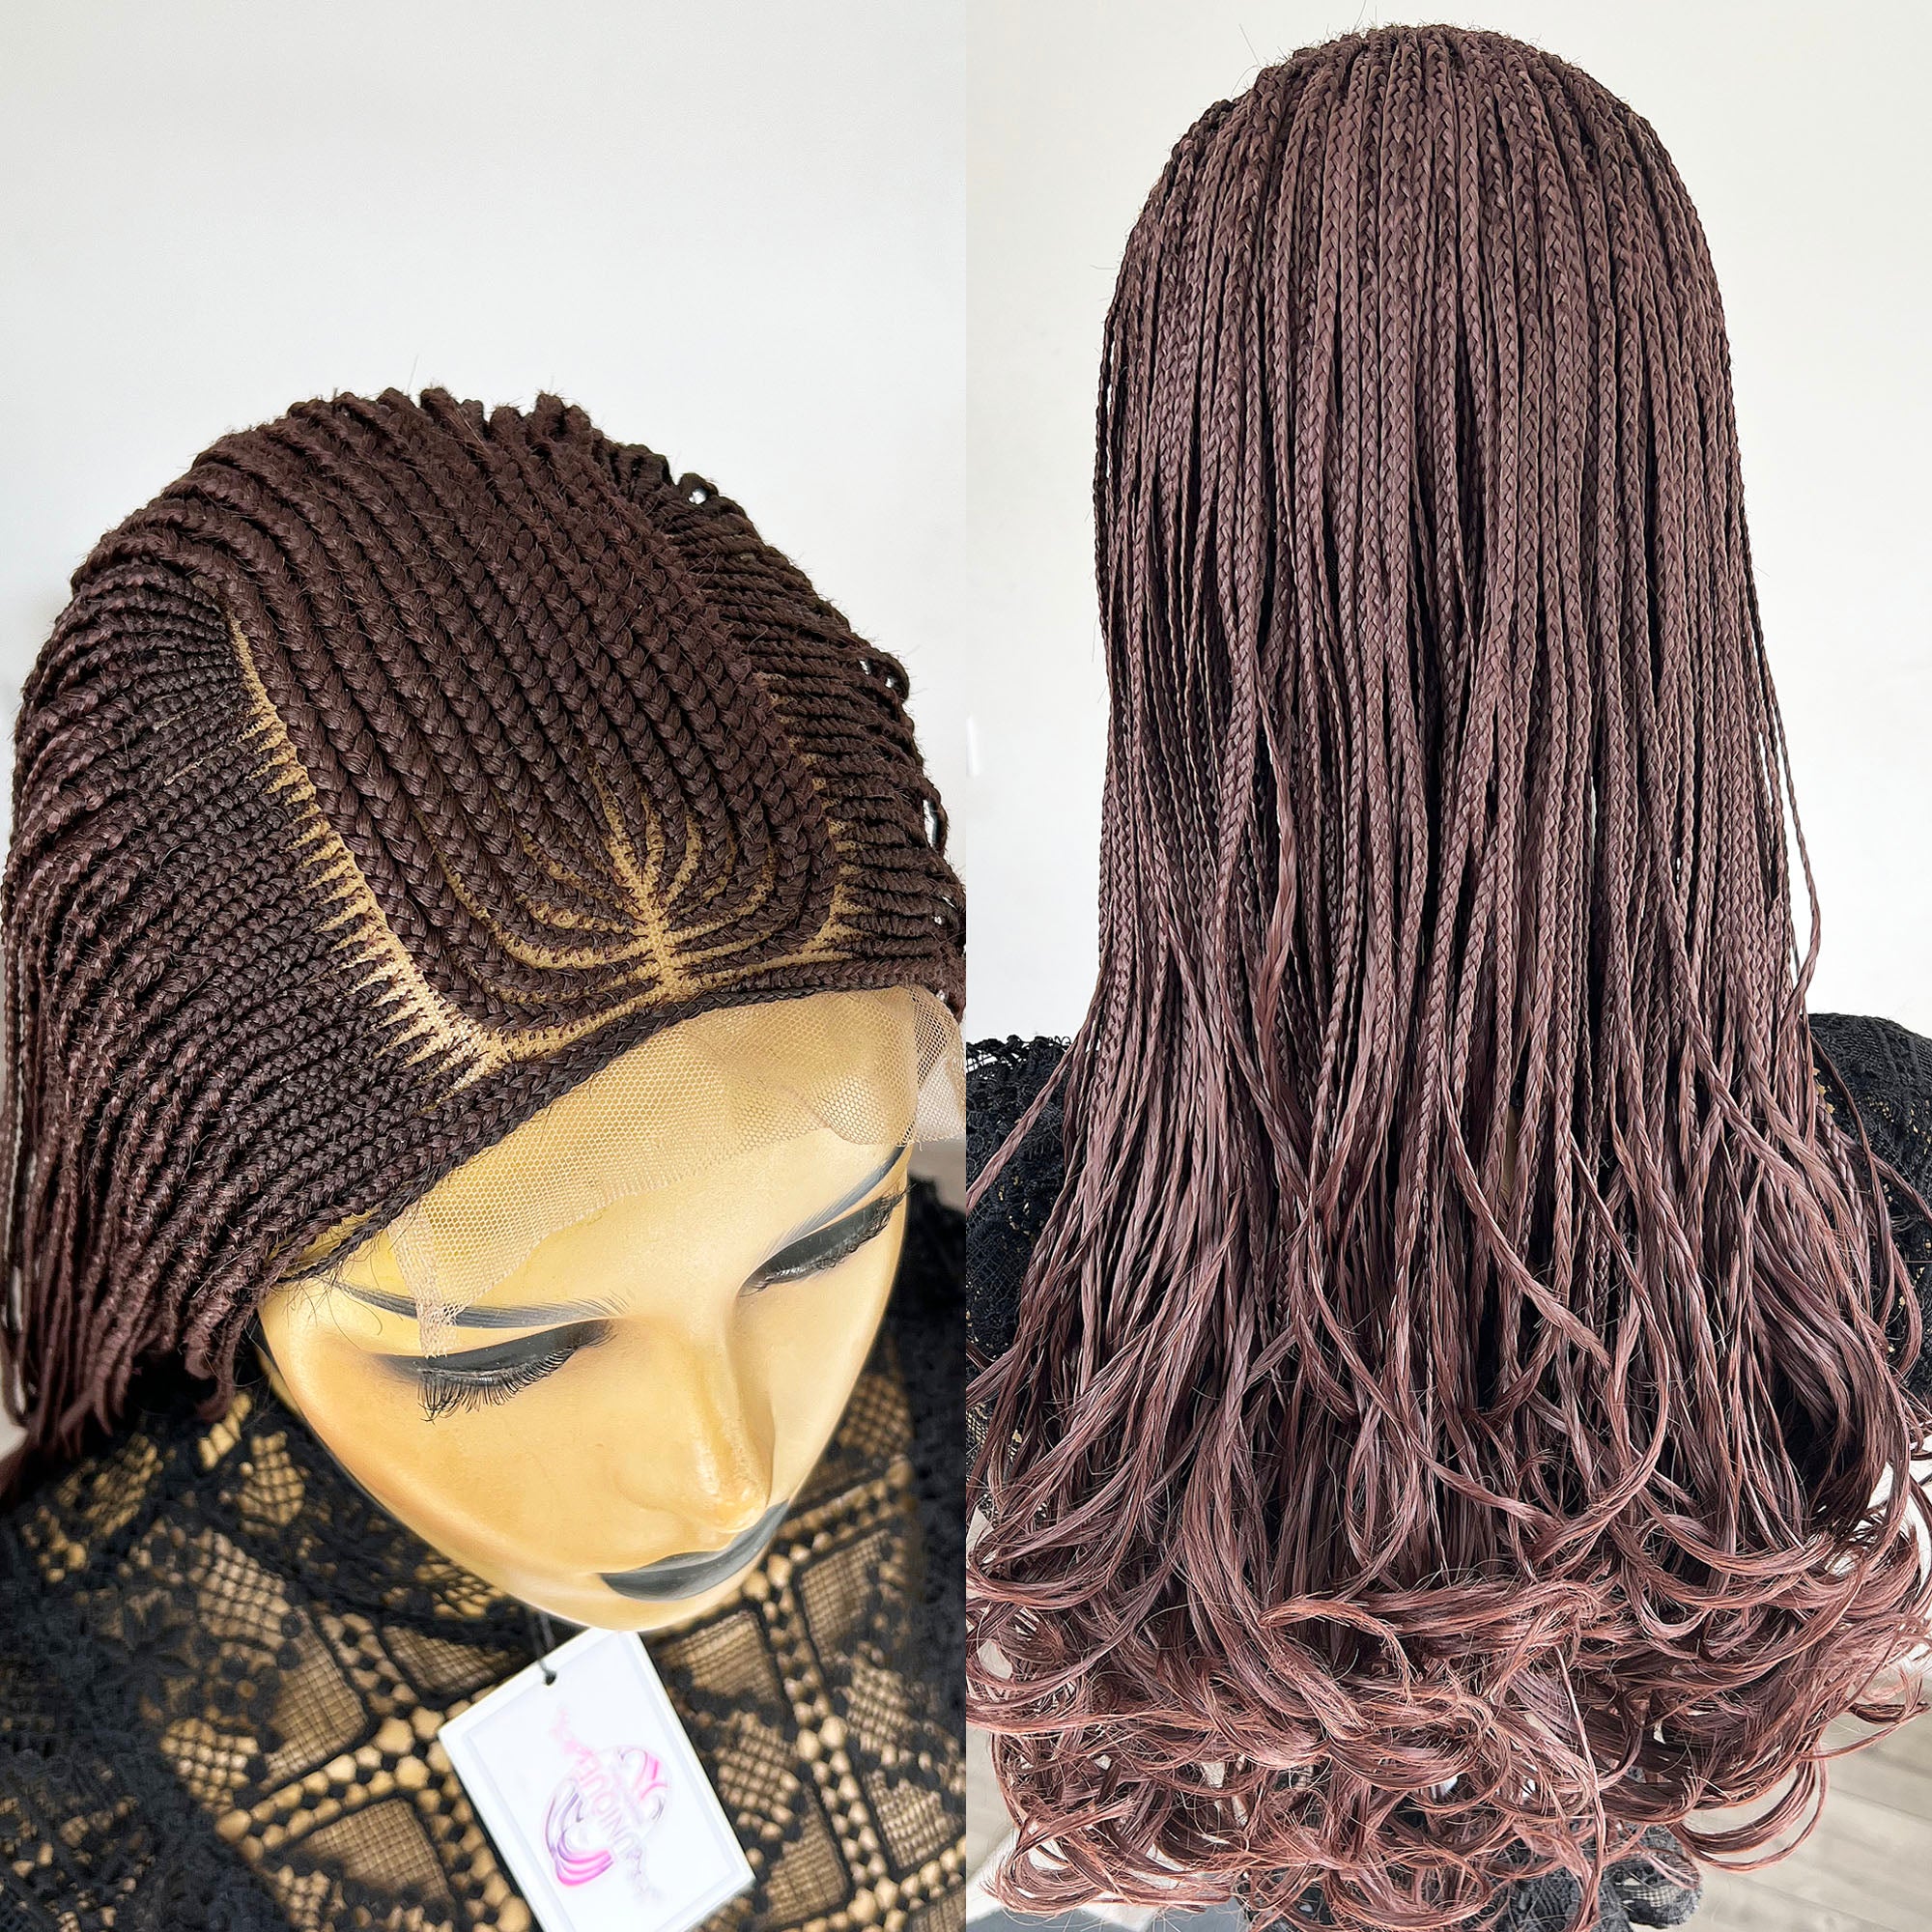 Cornrow Braids with Curly Ends - Color 33